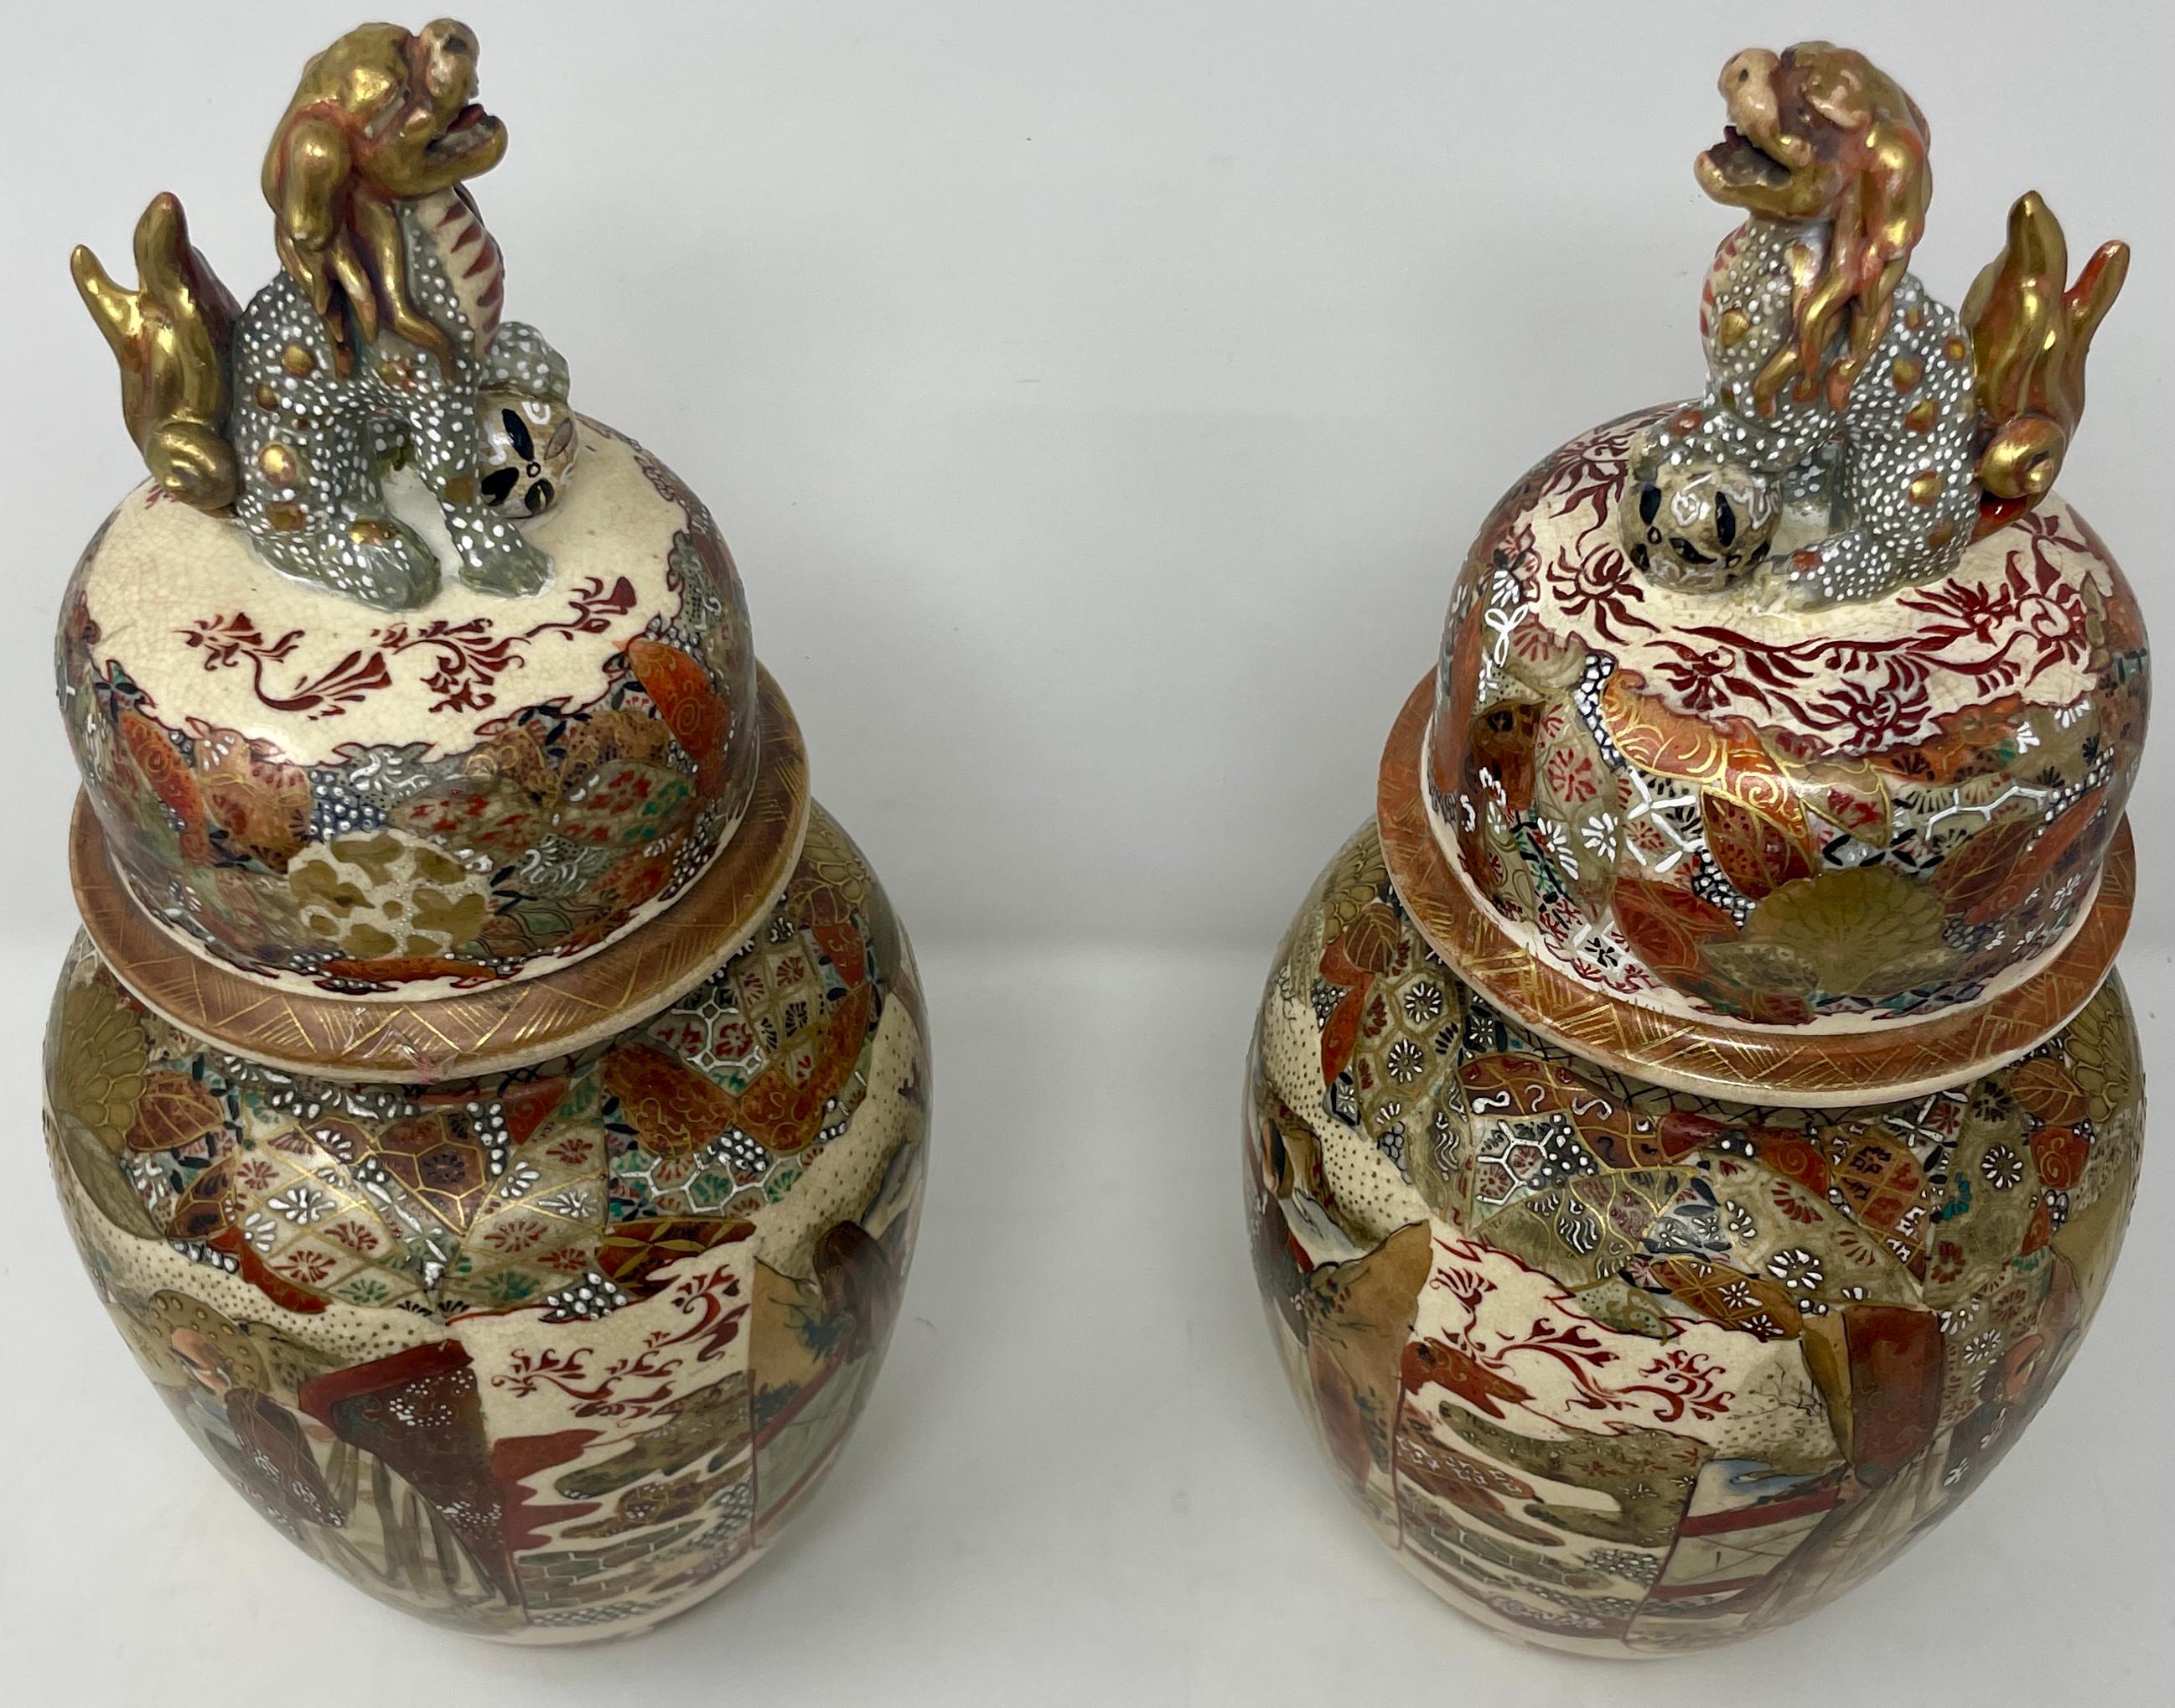 Pair Antique 19th Century Japanese Satsuma Porcelain Urns with Foo Dogs, Circa 1880.